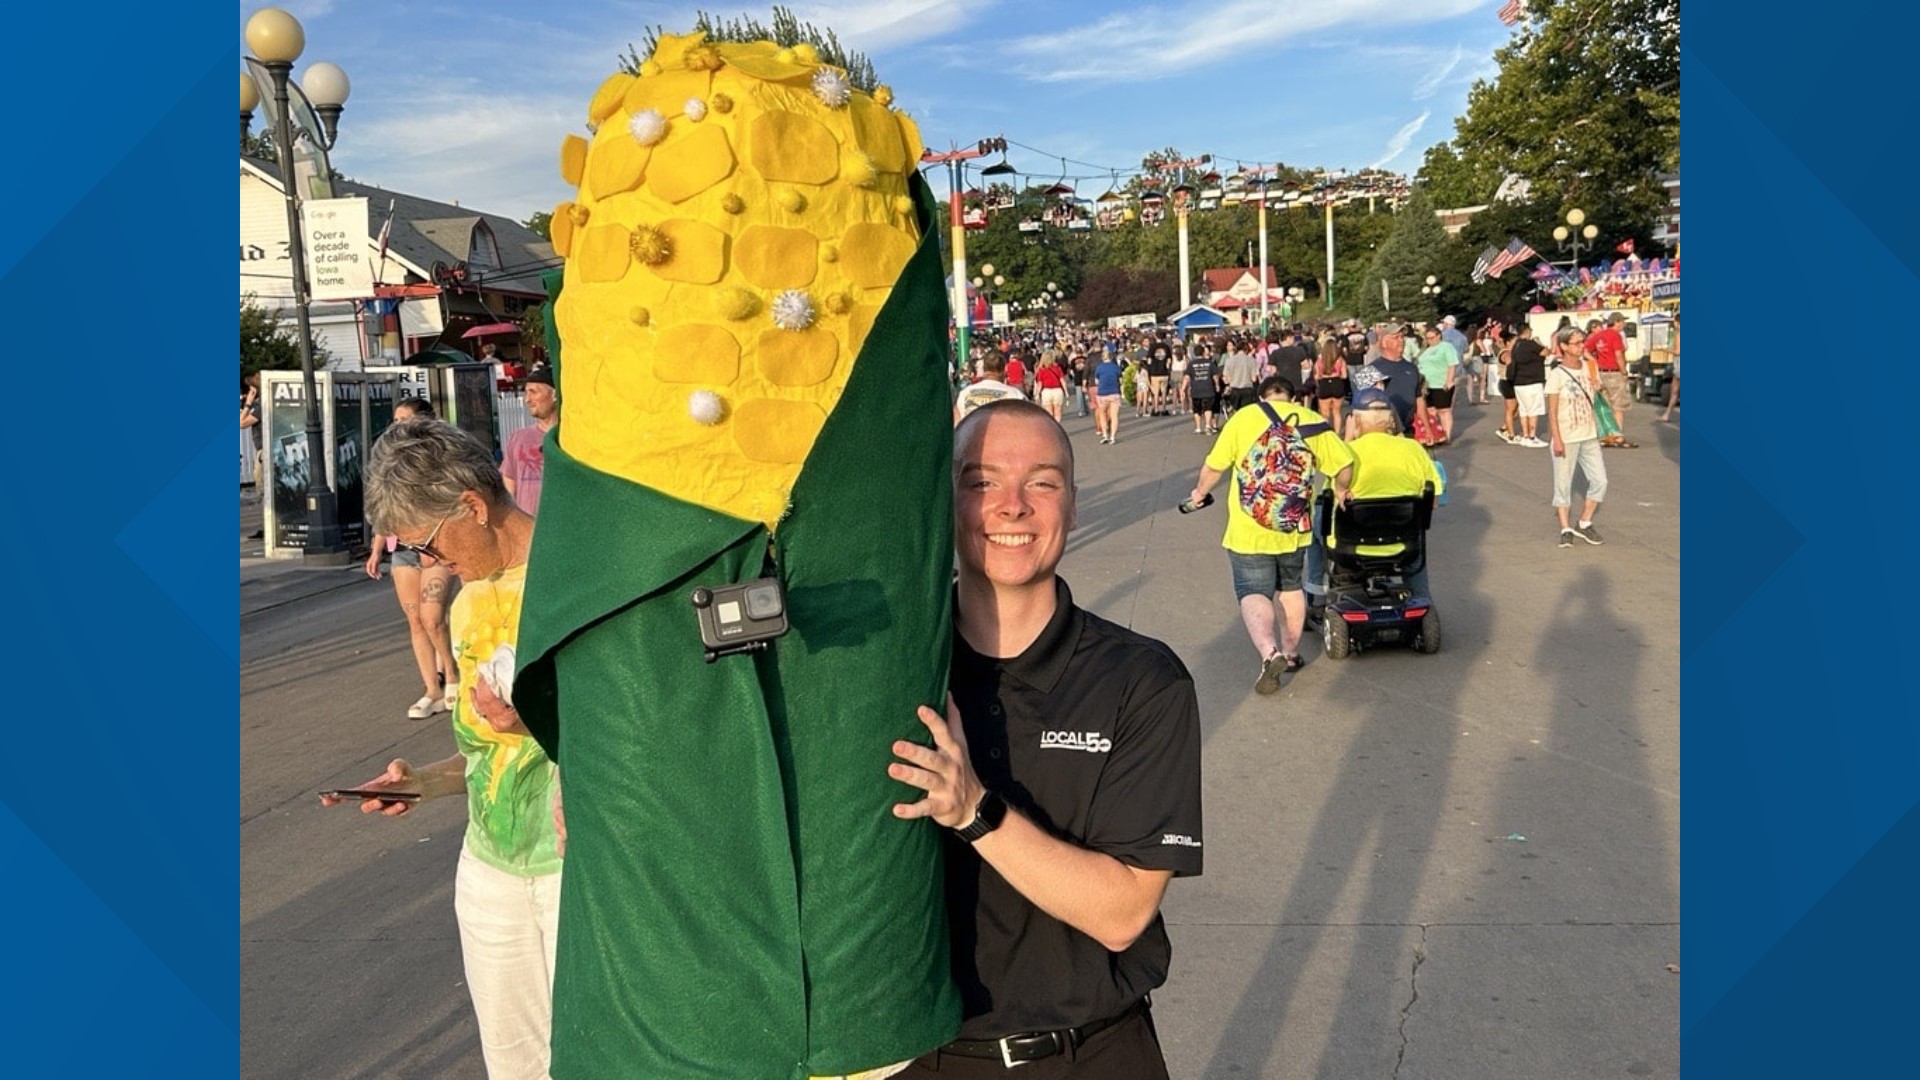 Local 5's Connor O'Neal walked the Iowa State fairgrounds holding a 4-foot-tall corn cob, asking people what they're proud of. The answers were anything but corny.